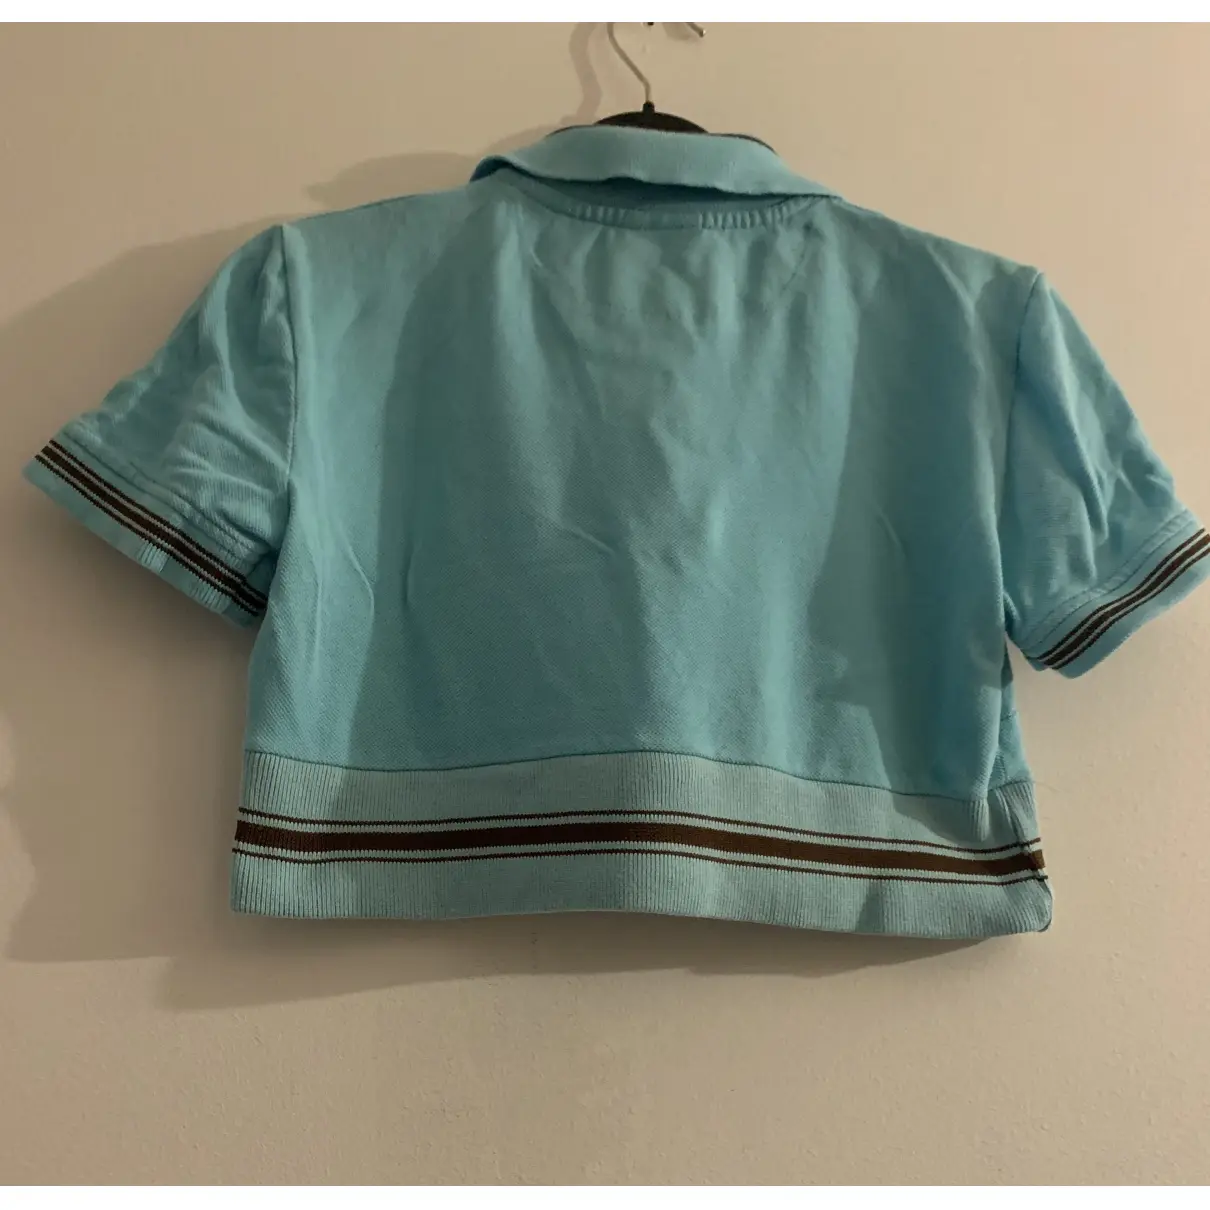 Buy D&G Turquoise Cotton Top online